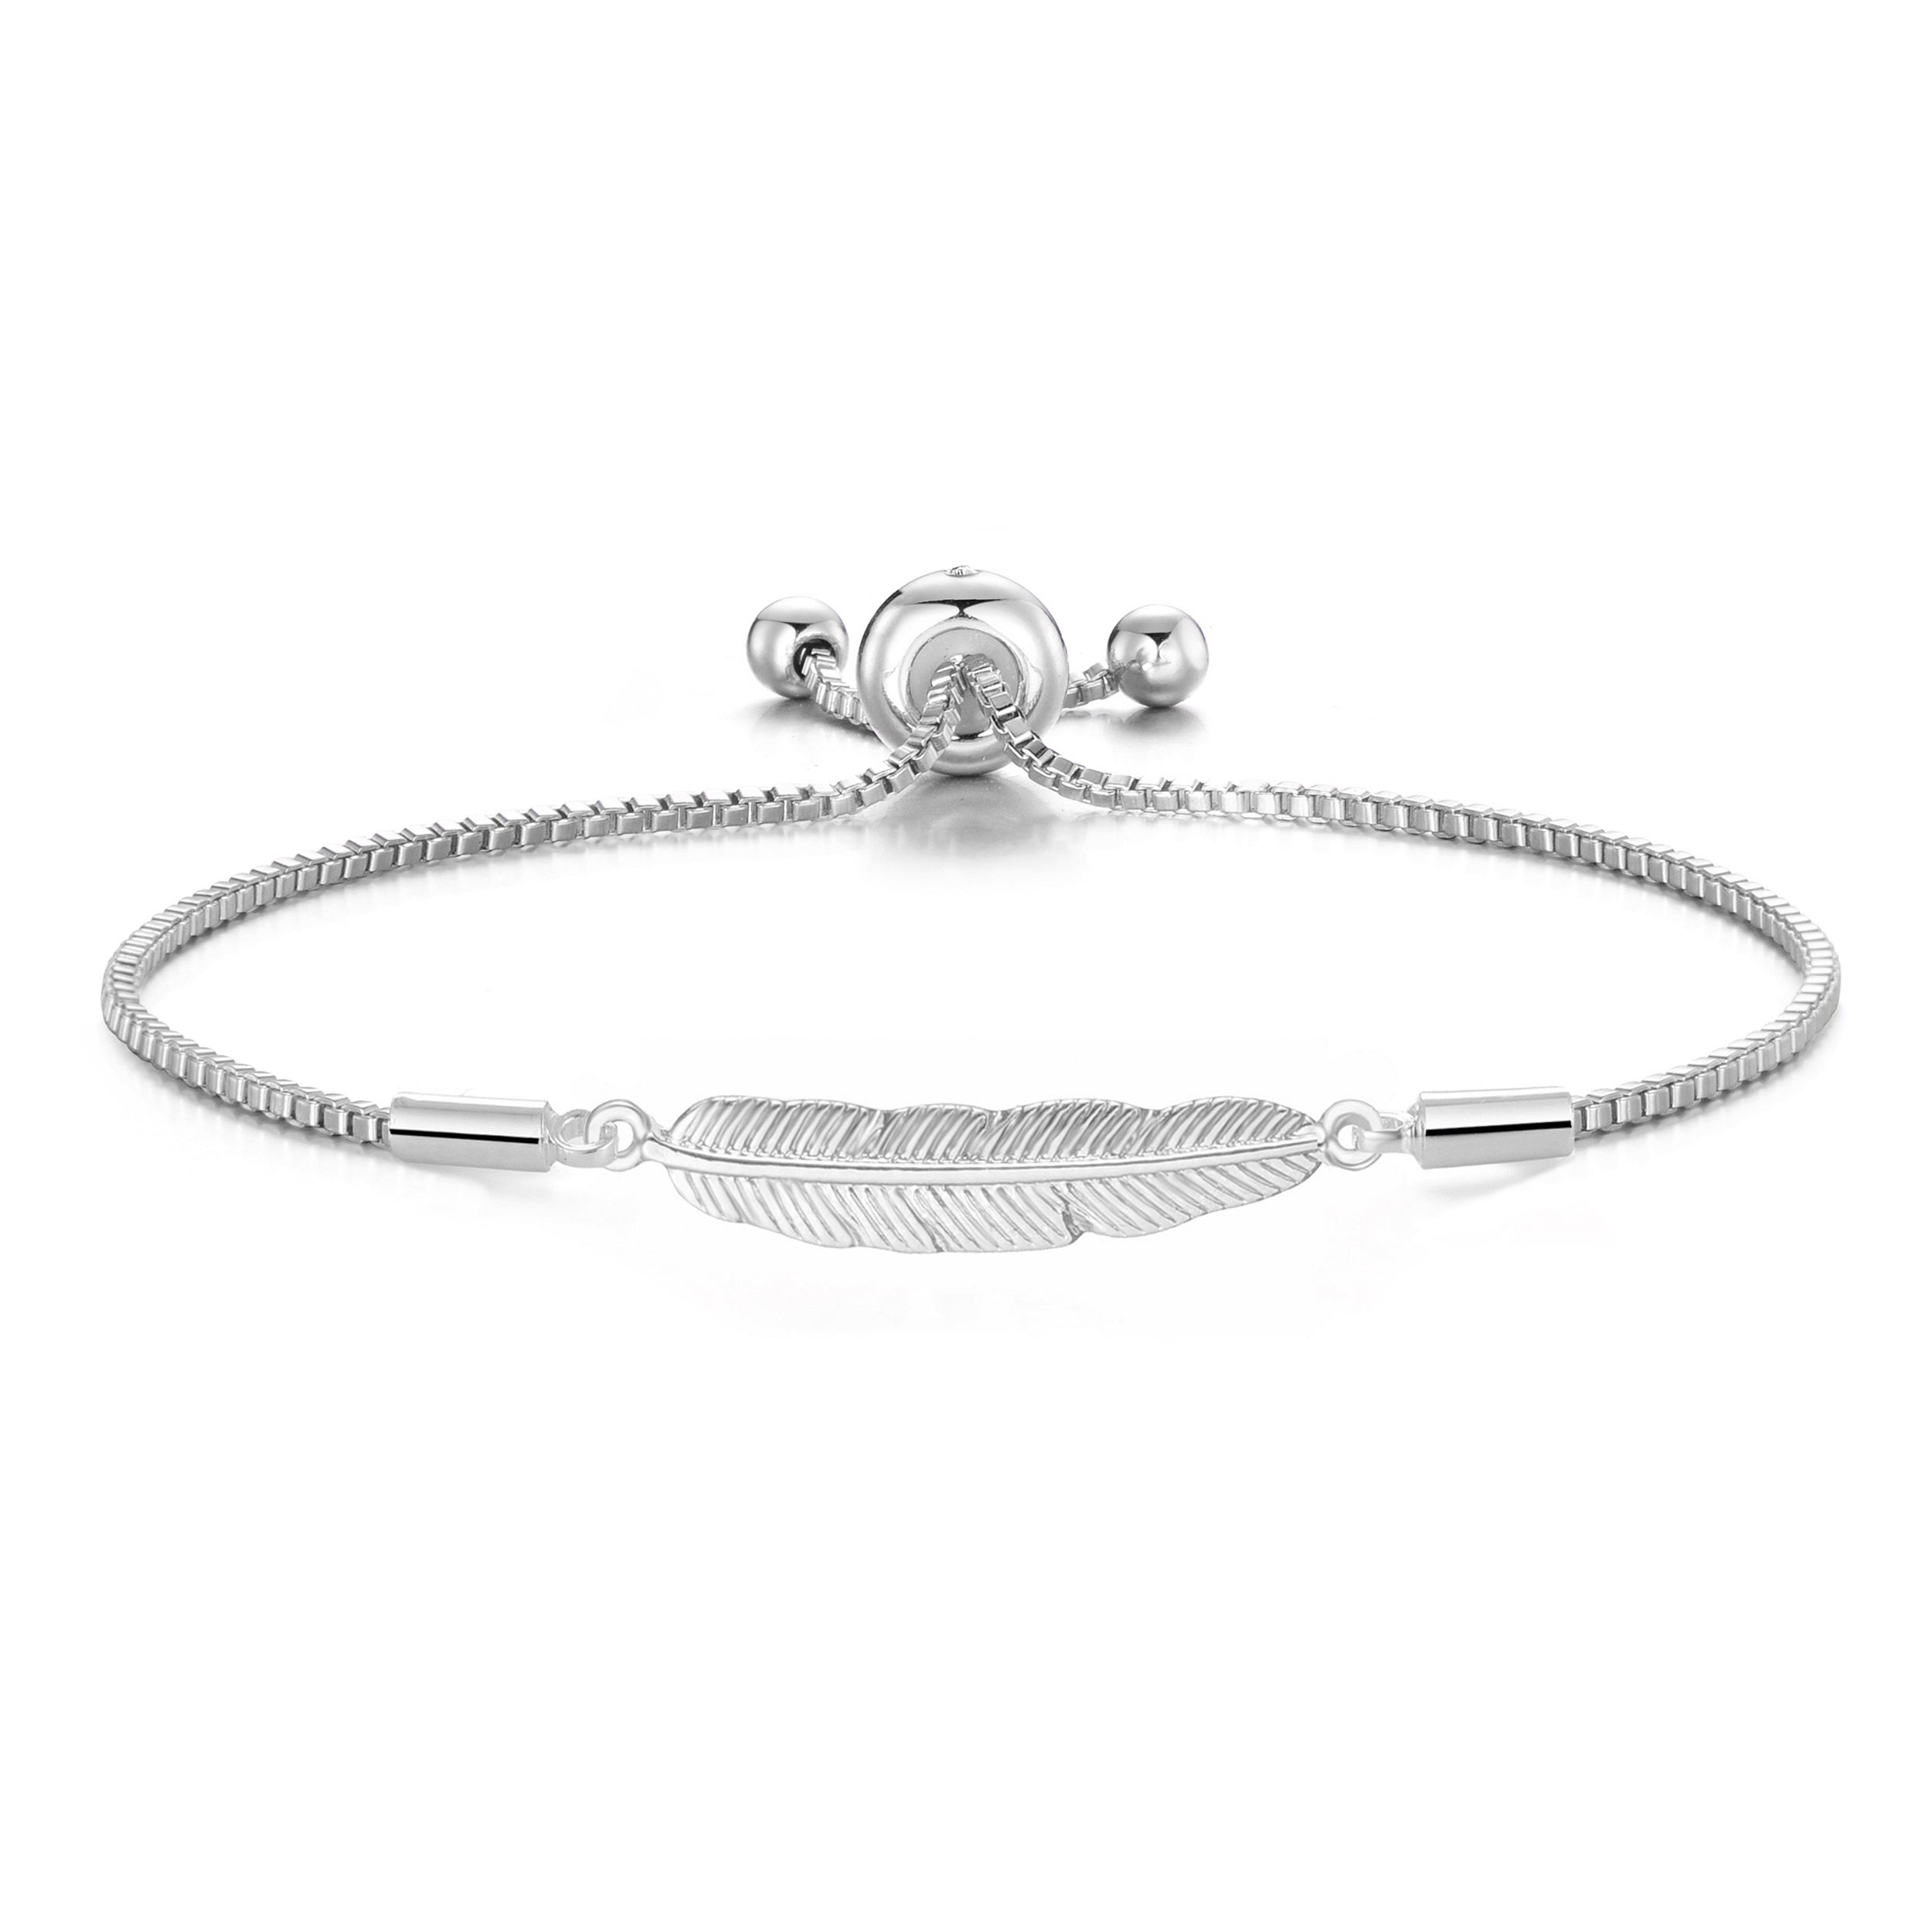 Silver Plated Feather Friendship Bracelet Created with Zircondia® Crystals by Philip Jones Jewellery